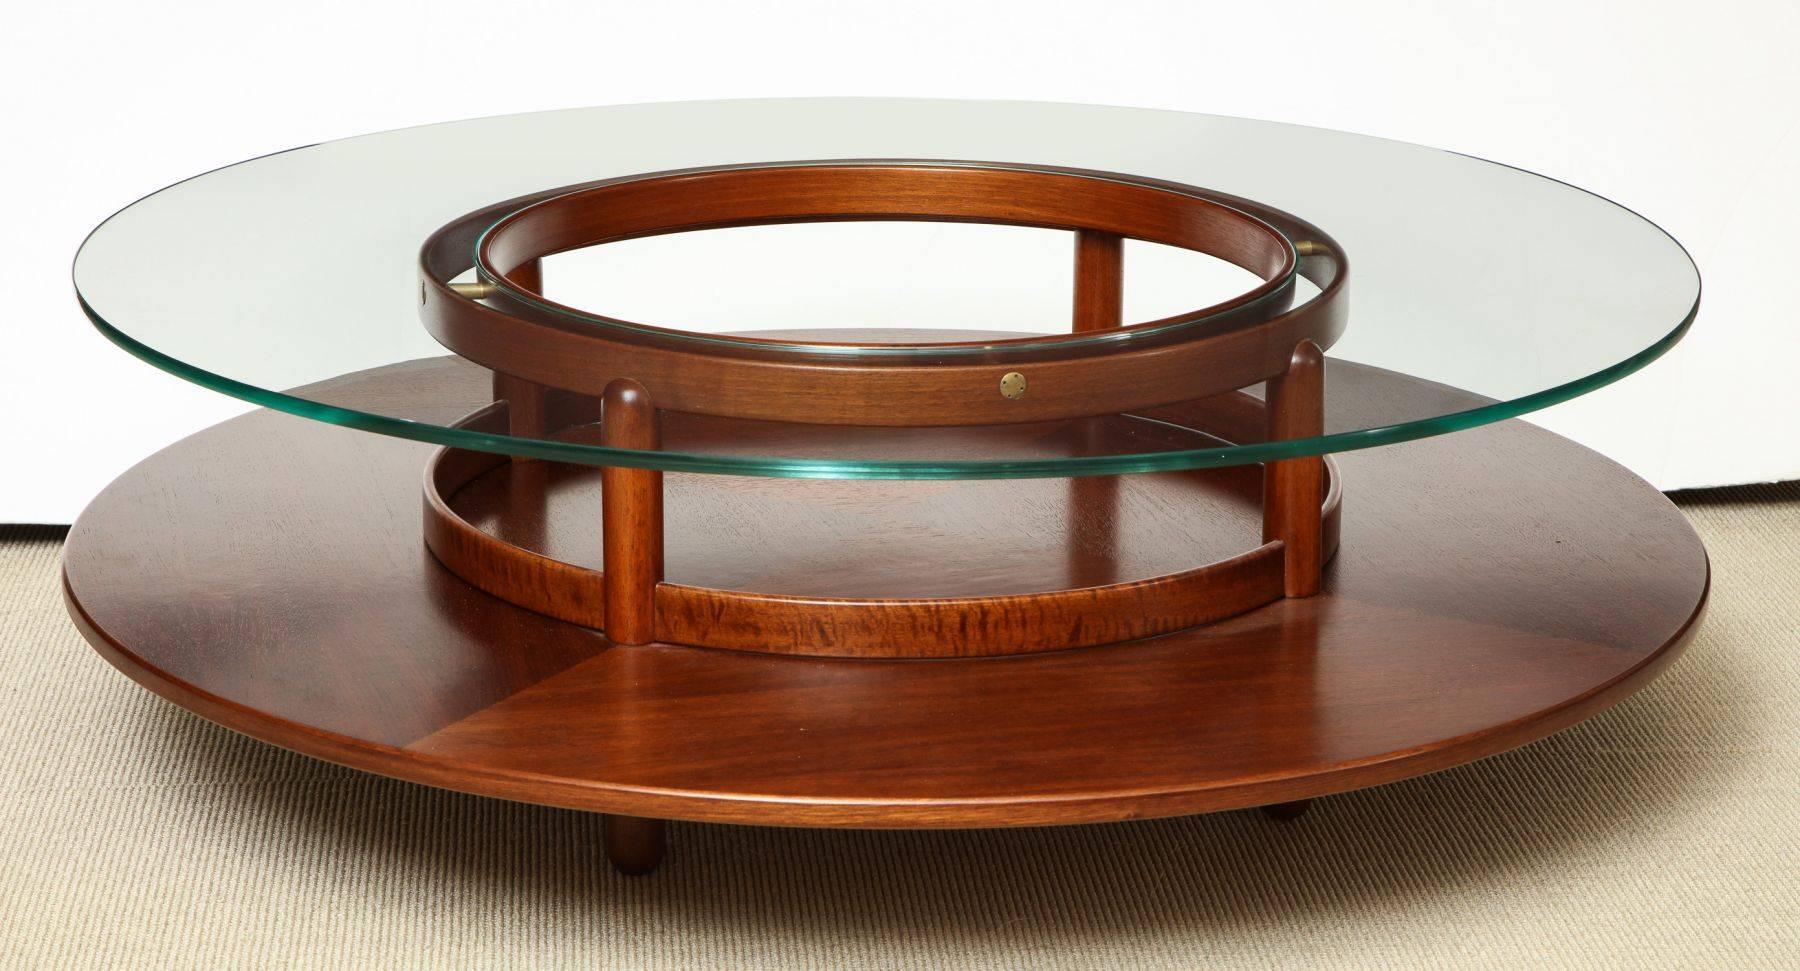 Round low table in rosewood with glass top and brass fittings by Giafranco Frattini for Cassina, Italy, circa 1960.